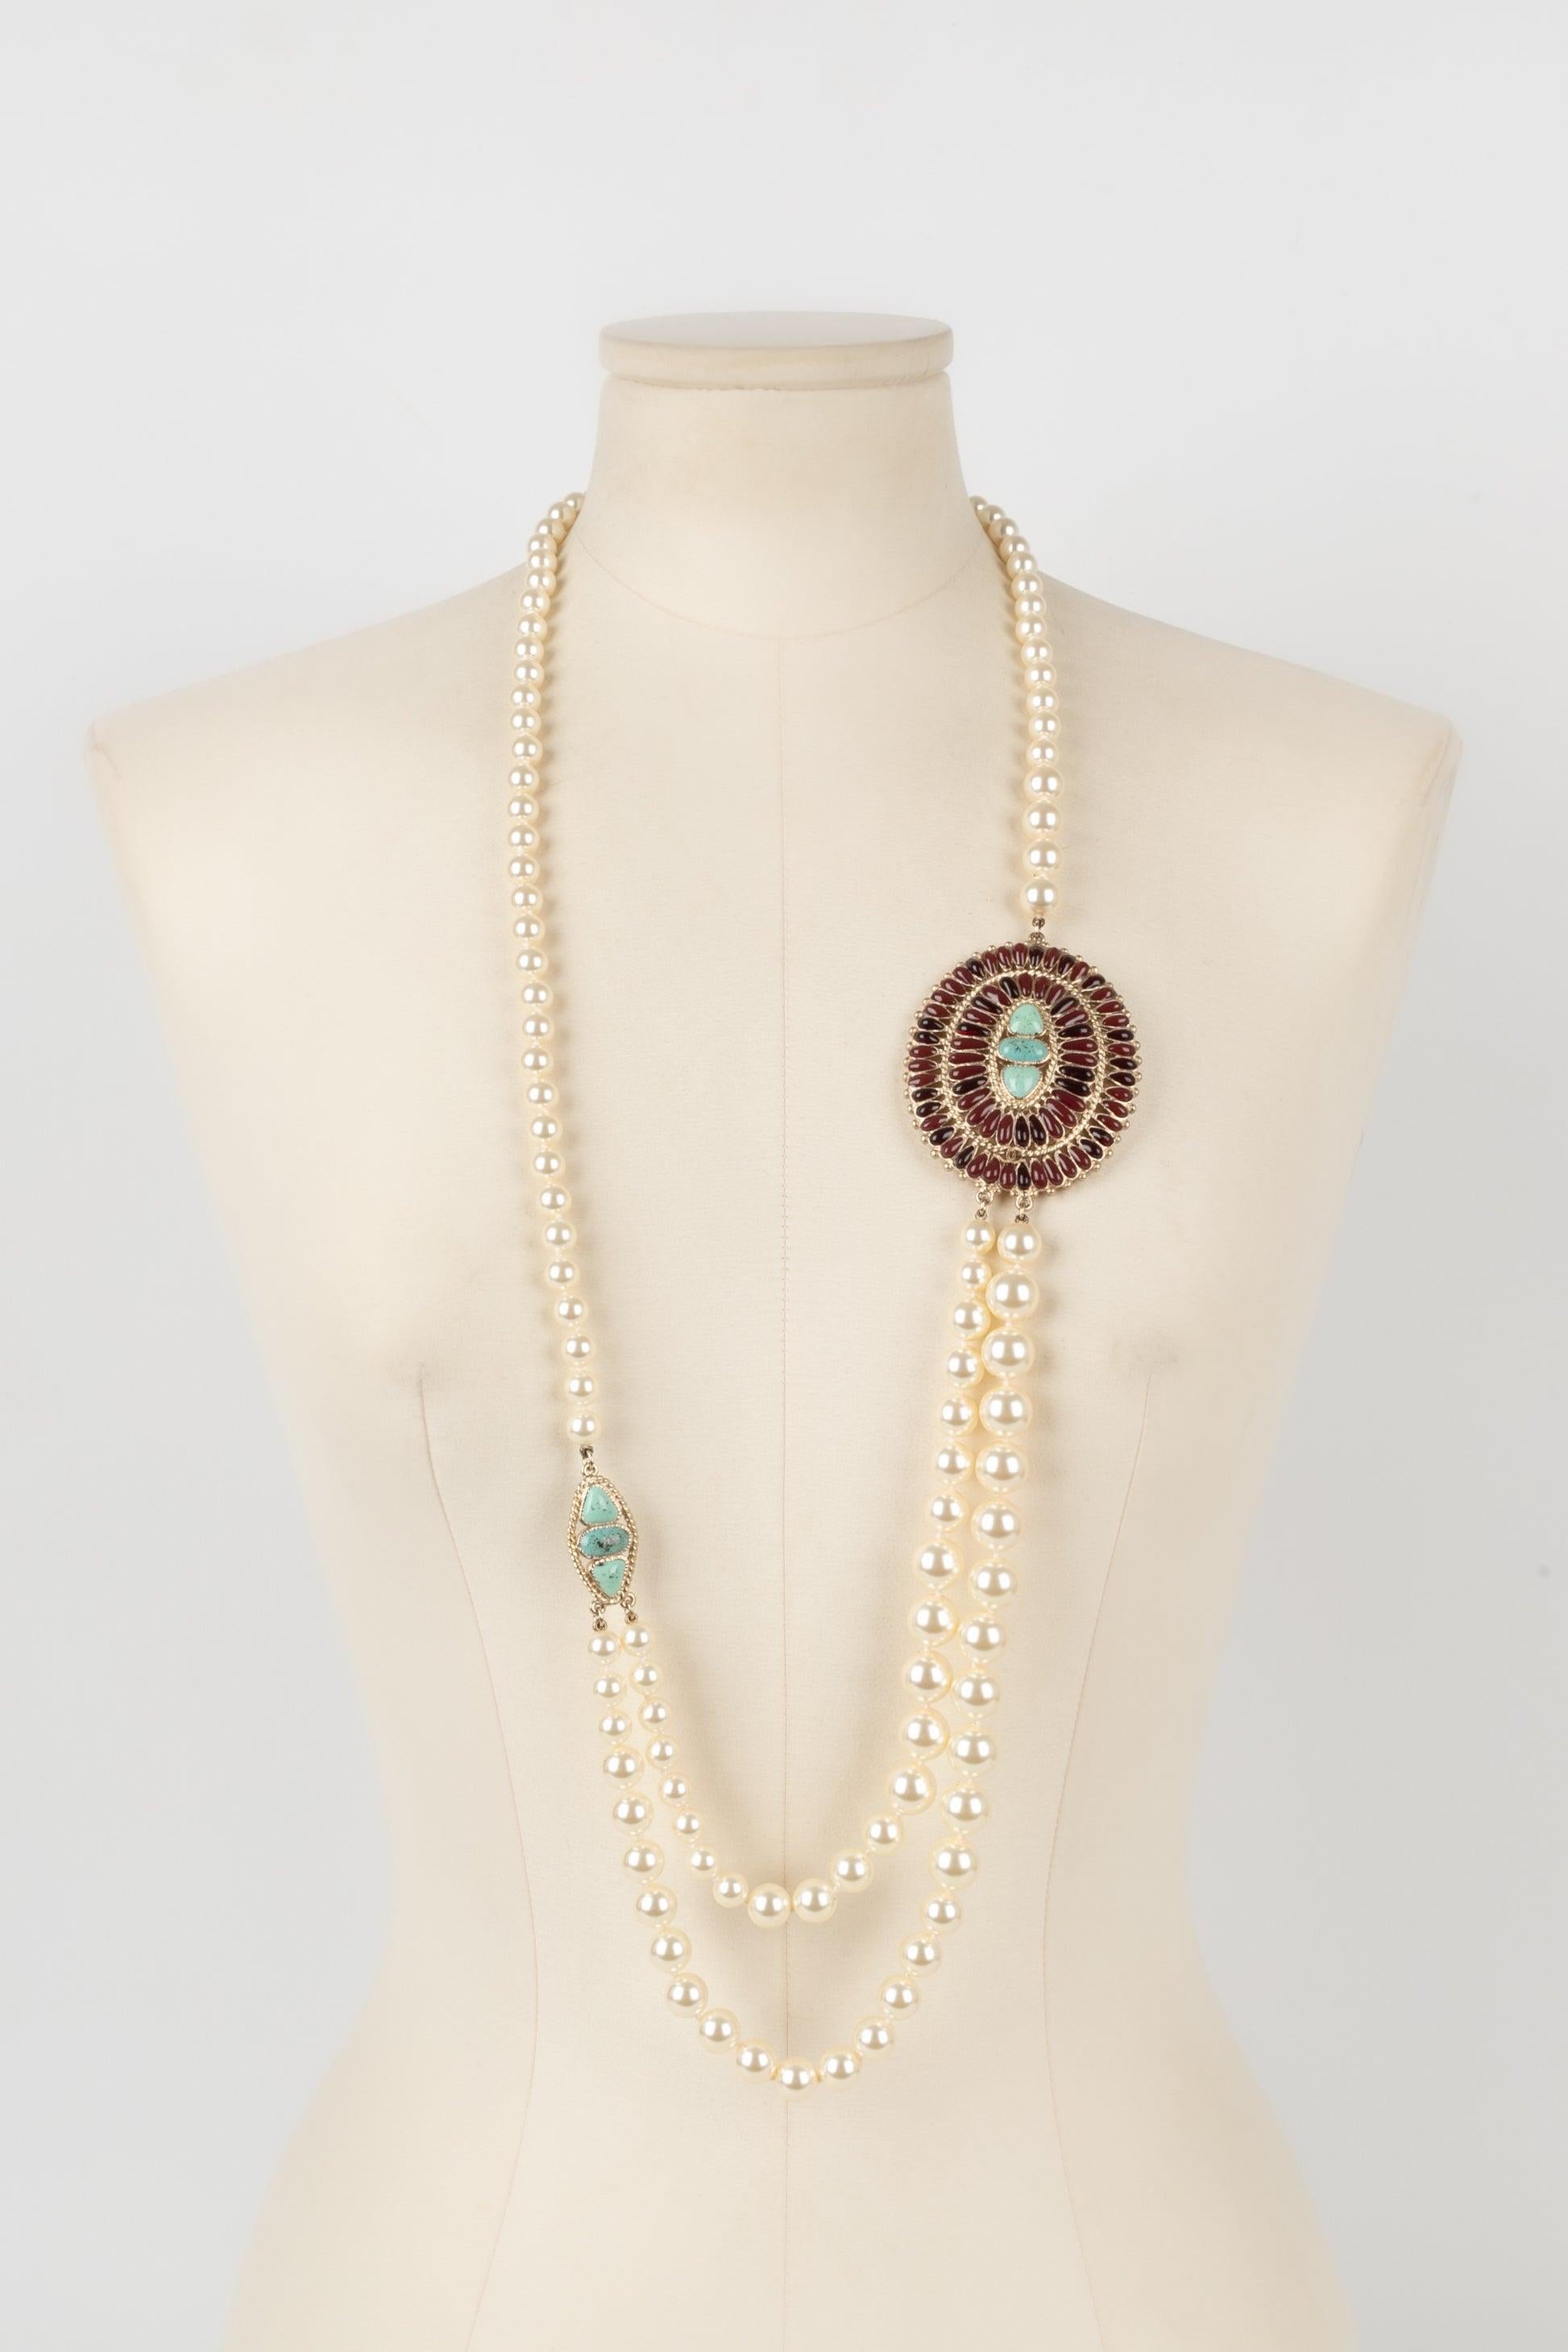 Chanel Long Necklace with Pearls and Blue and Burgundy Resin Medallions, 2014 2